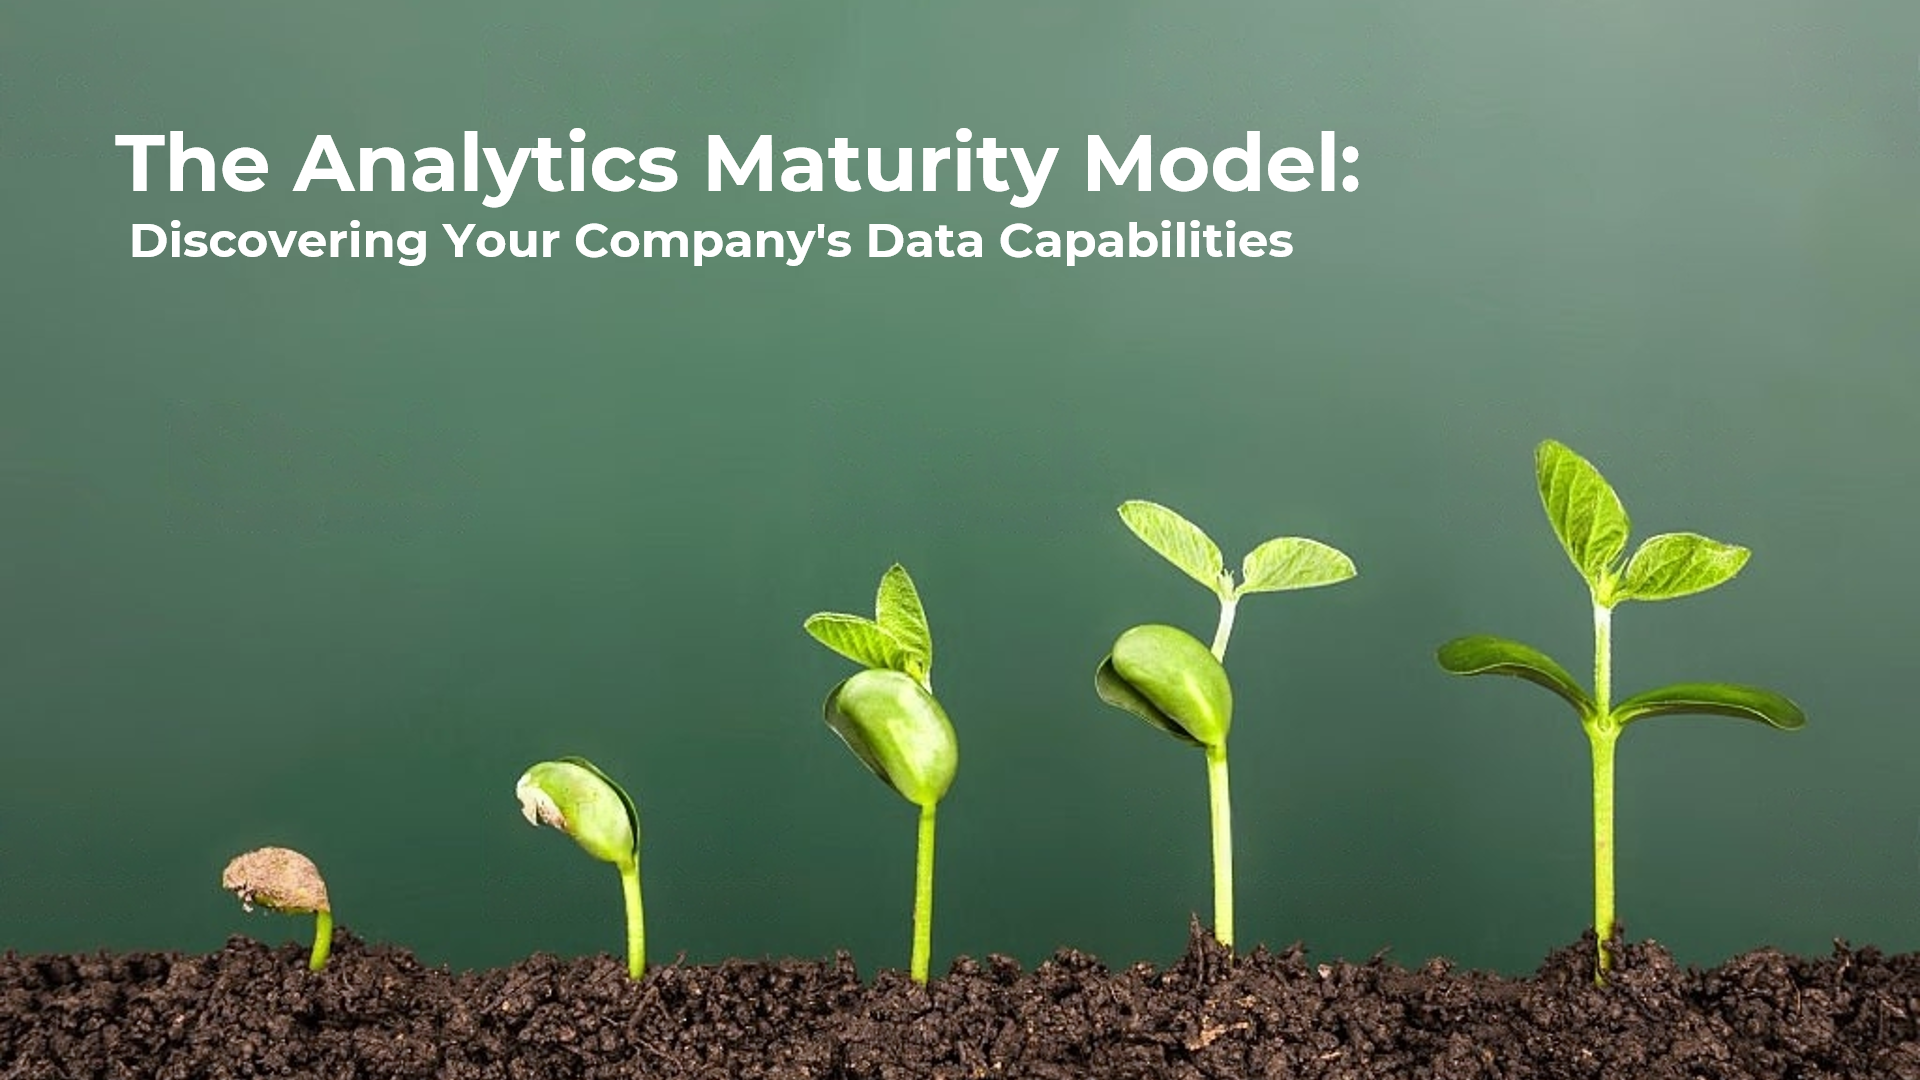 Analytics Evolution: A Guide to Identifying Your Organization's Stage